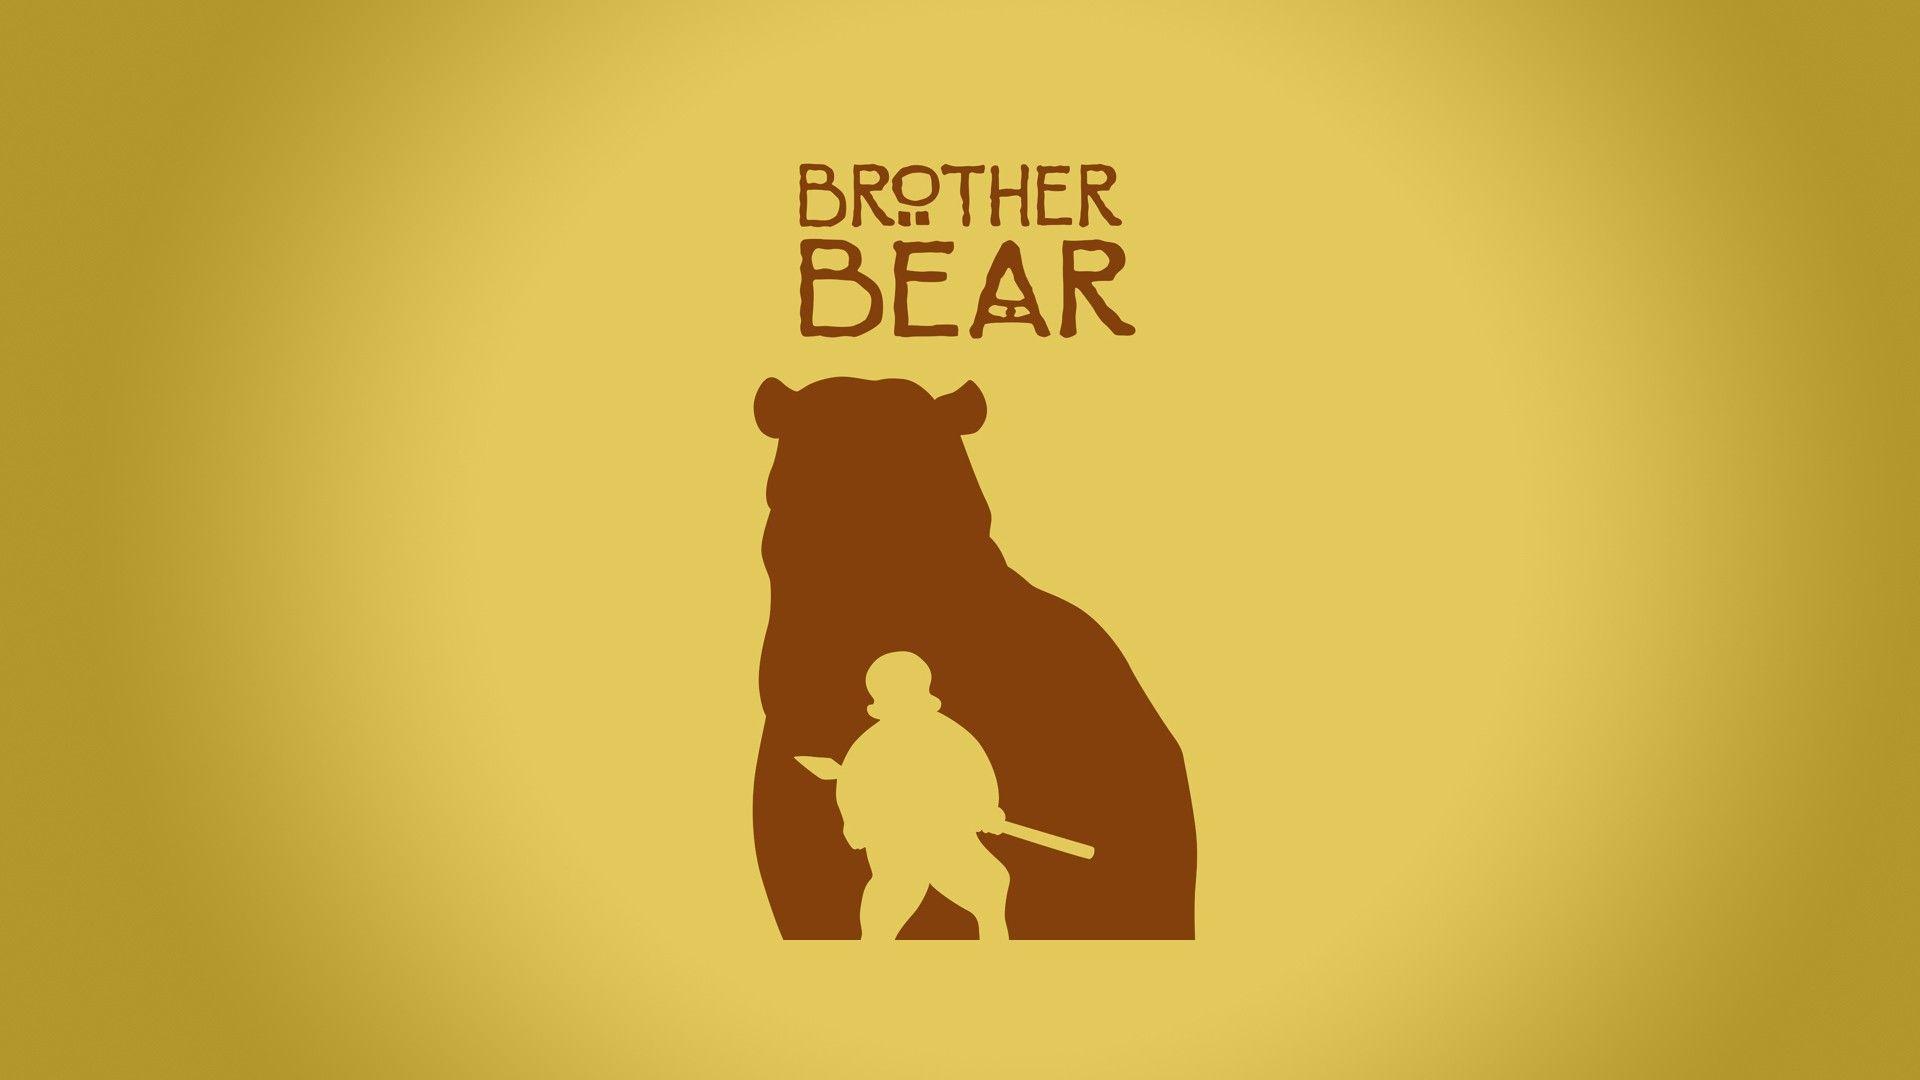 Brother Bear Wallpapers - Wallpaper Cave.